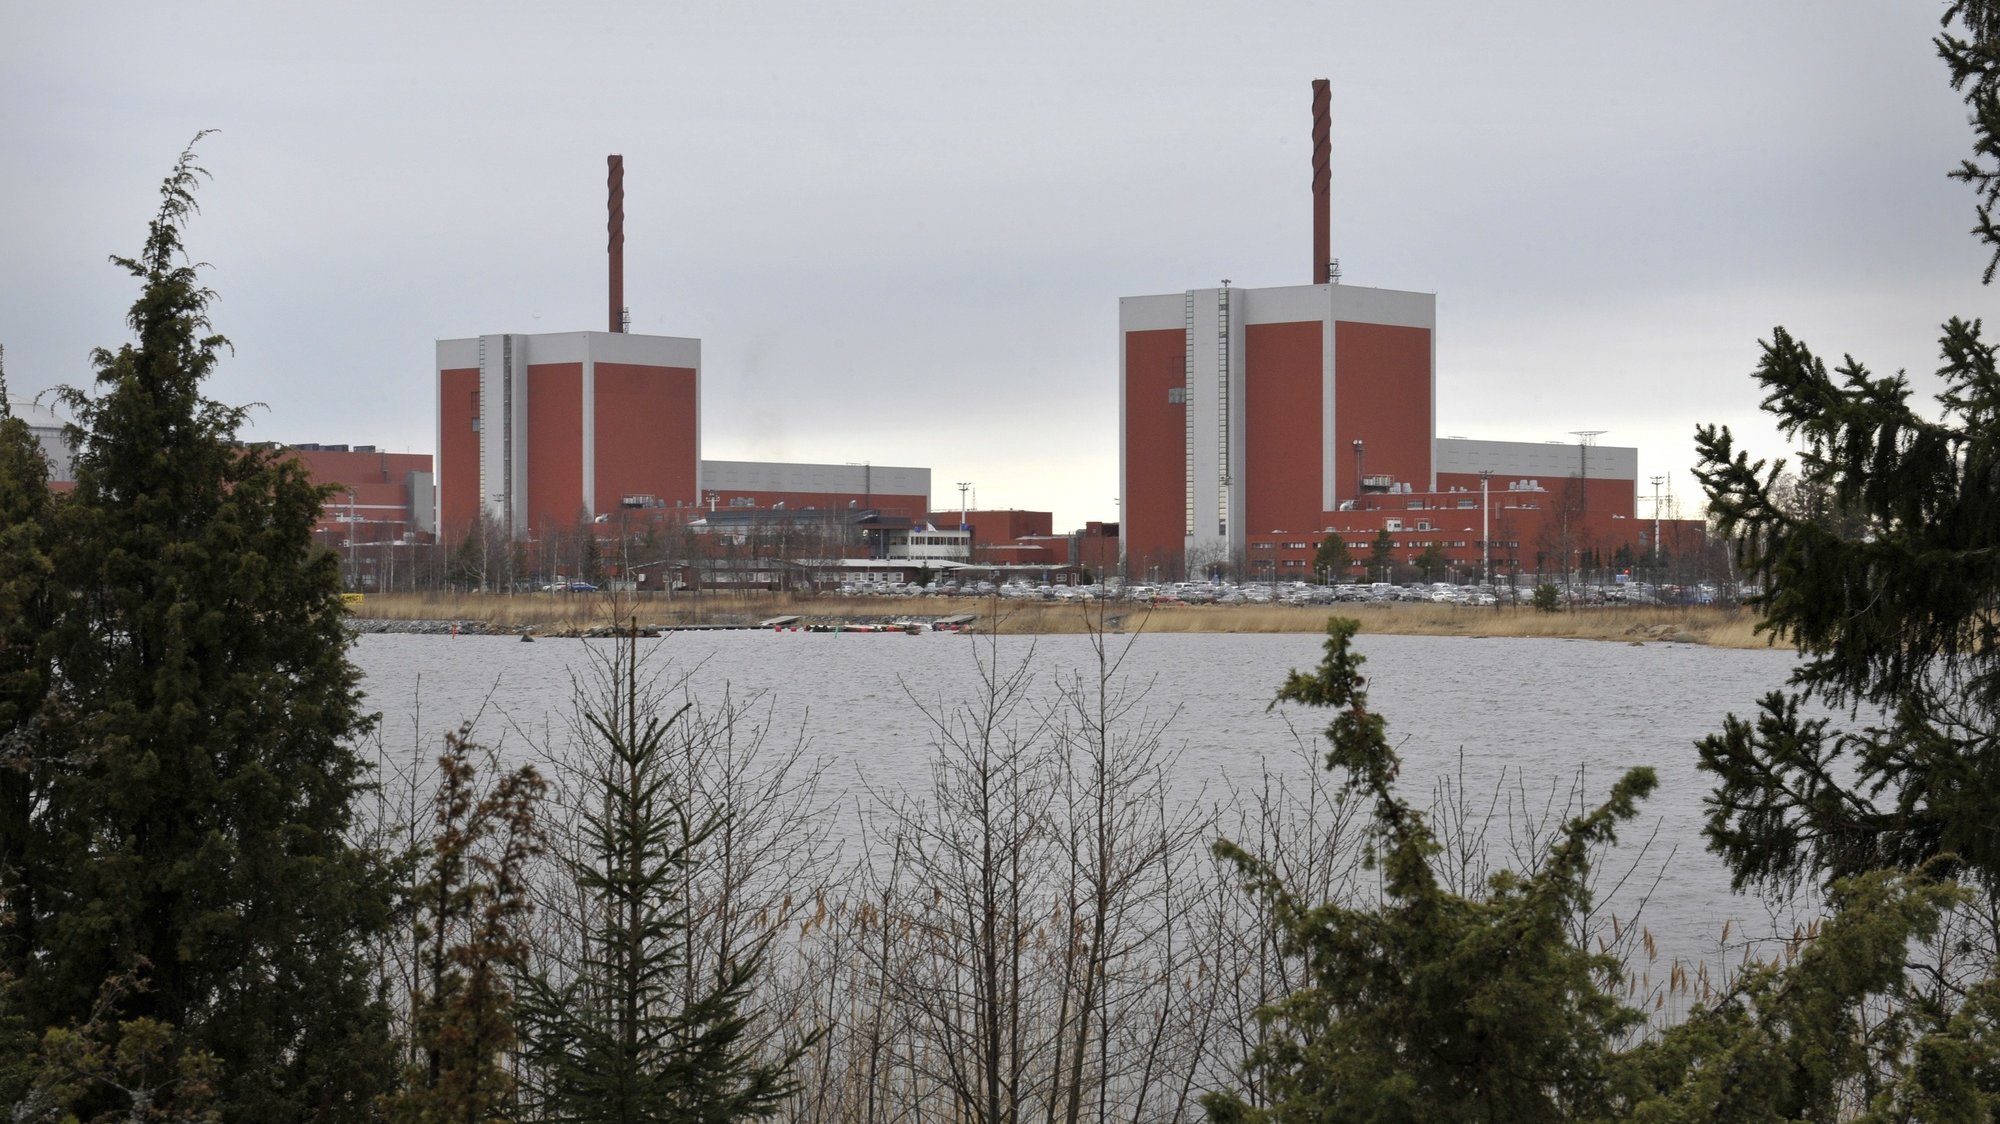 epa08875379 (FILE) - An exterior view of Olkiluoto nuclear power plant in Rauma, Finland, 07 April 2016 (reissued 10 December 2020). According to news reports, an incident at the nuclear power plant in Raum resulted in the shutdown of energy at the OL2 reactor.  EPA/JUHA SINISALO